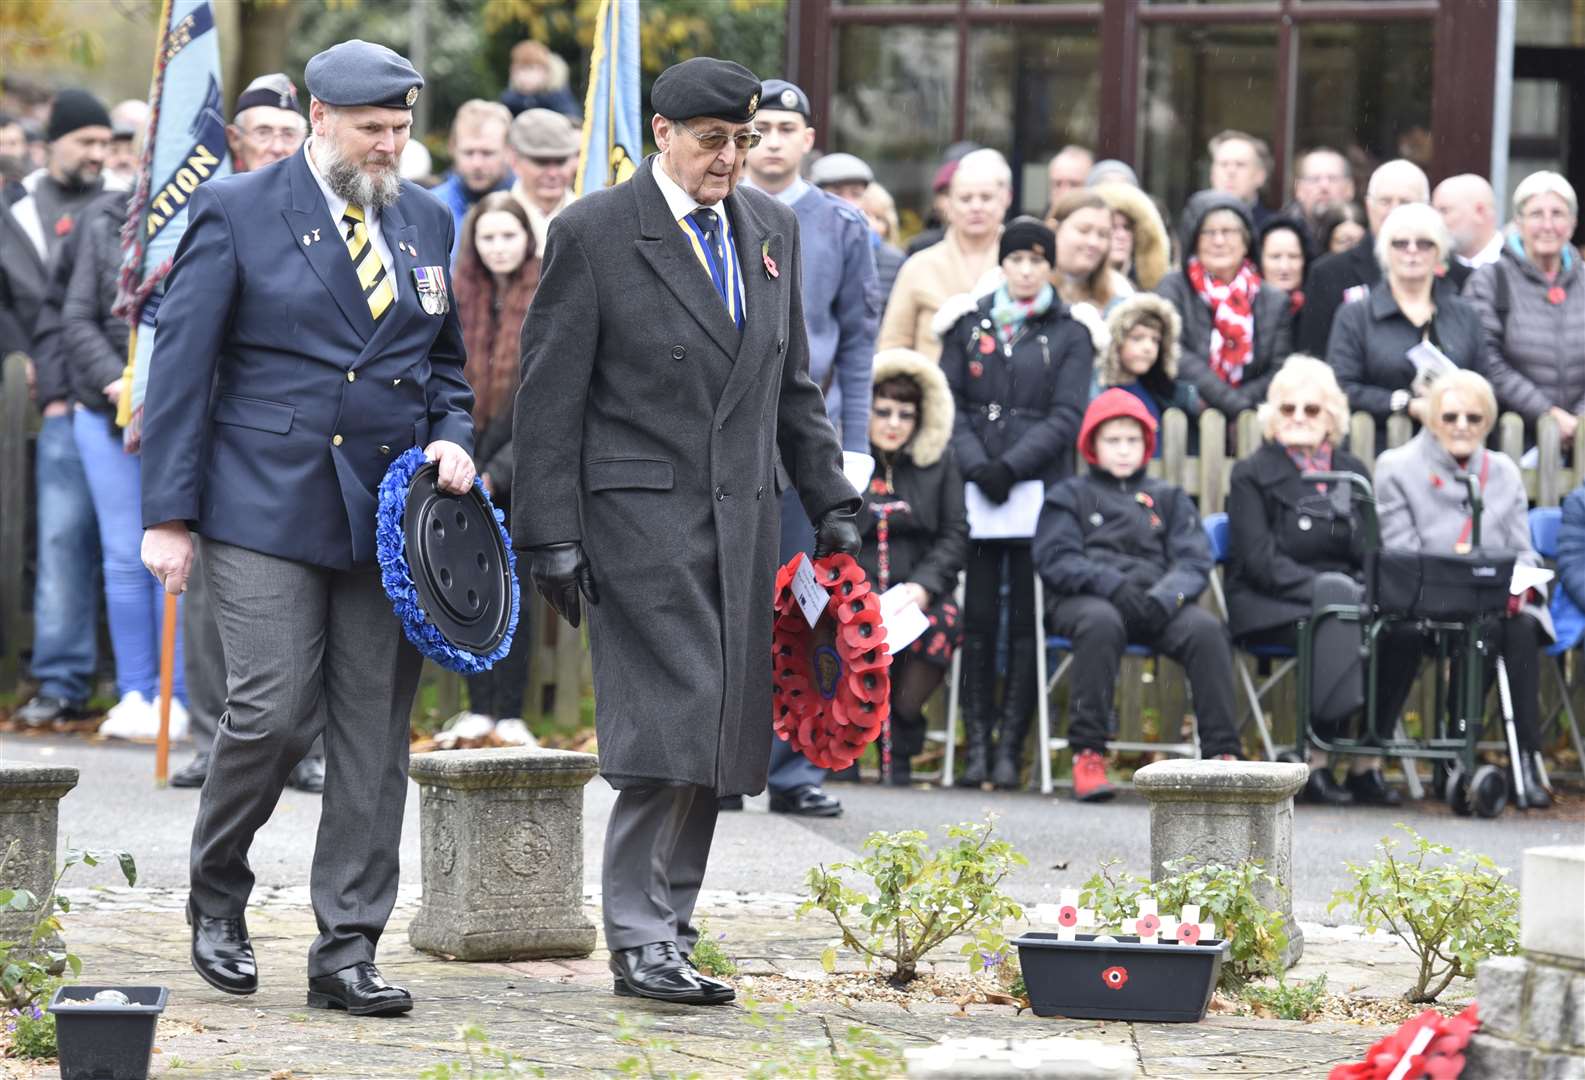 The Remembrance Sunday service at Deal today